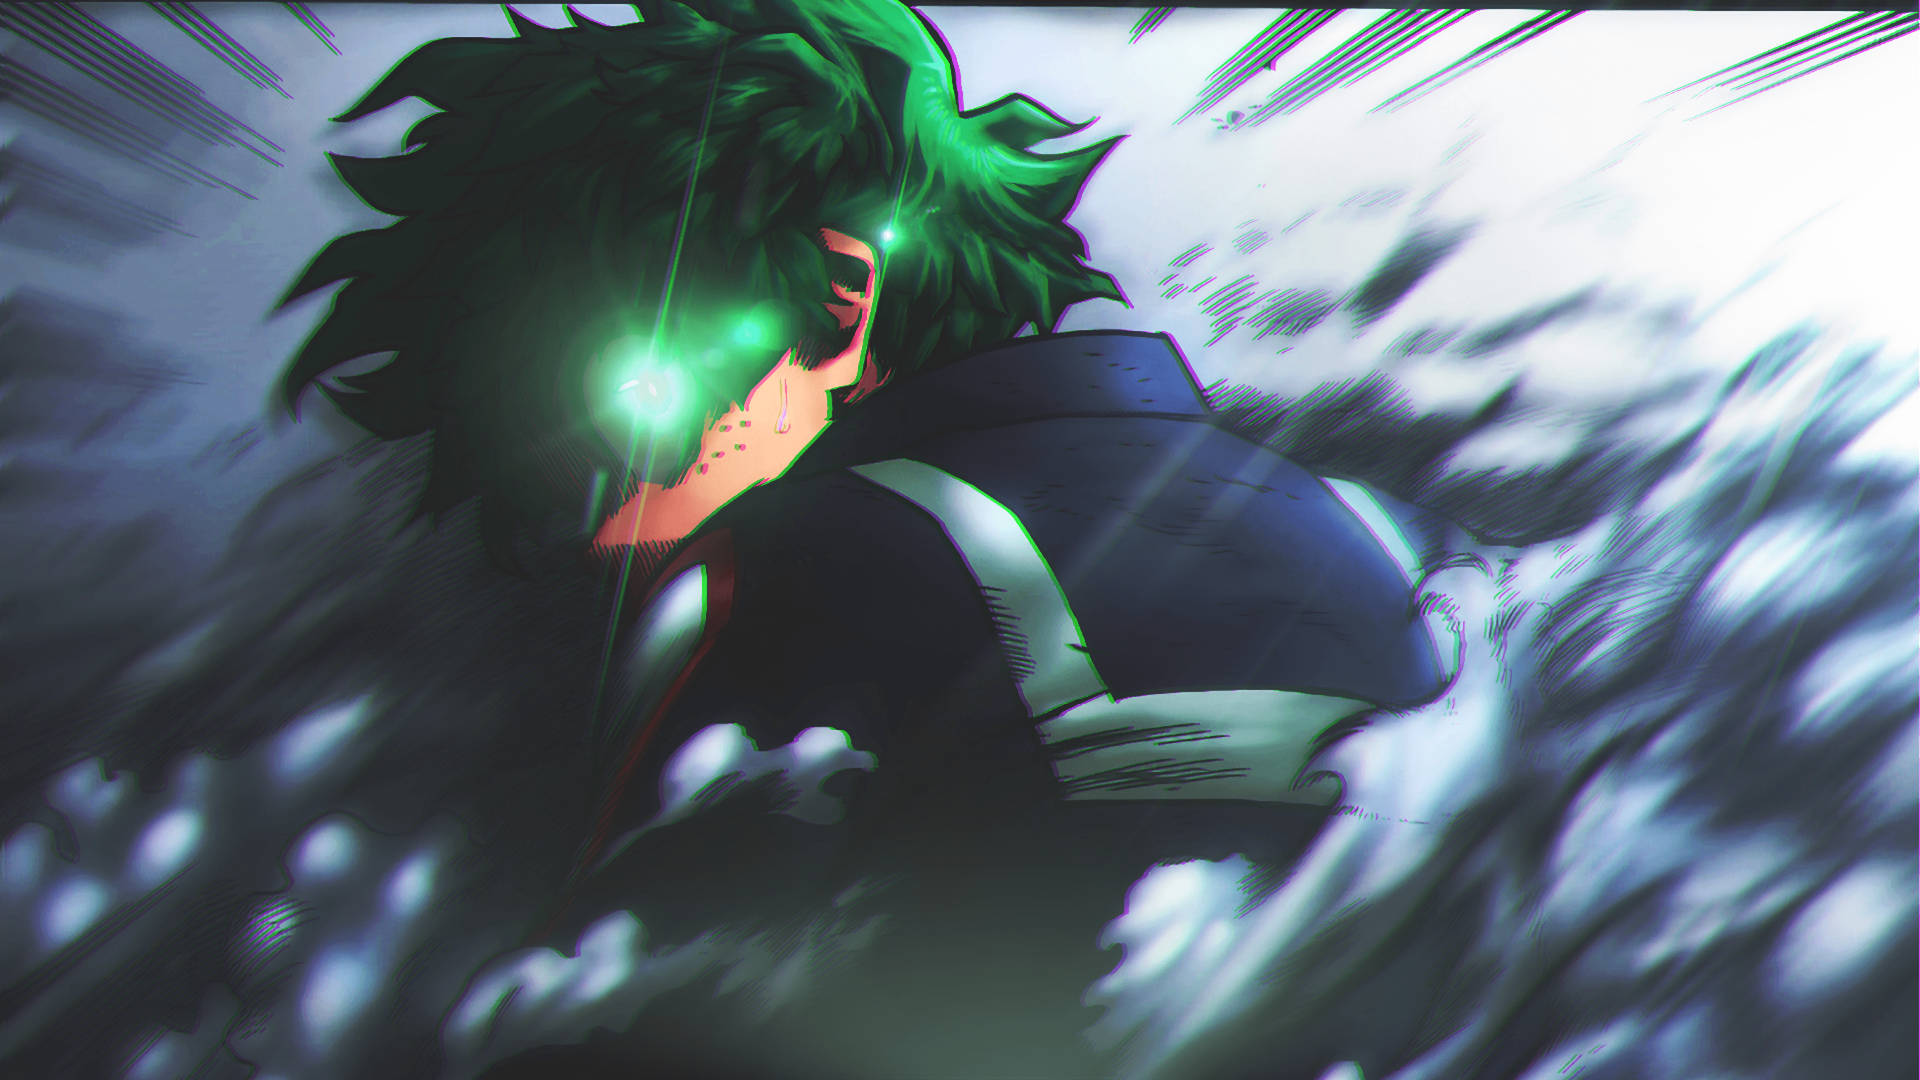 “My Hero Academia’s Izuku Midoriya achieves his dream of becoming a hero with the help of All Might” Wallpaper